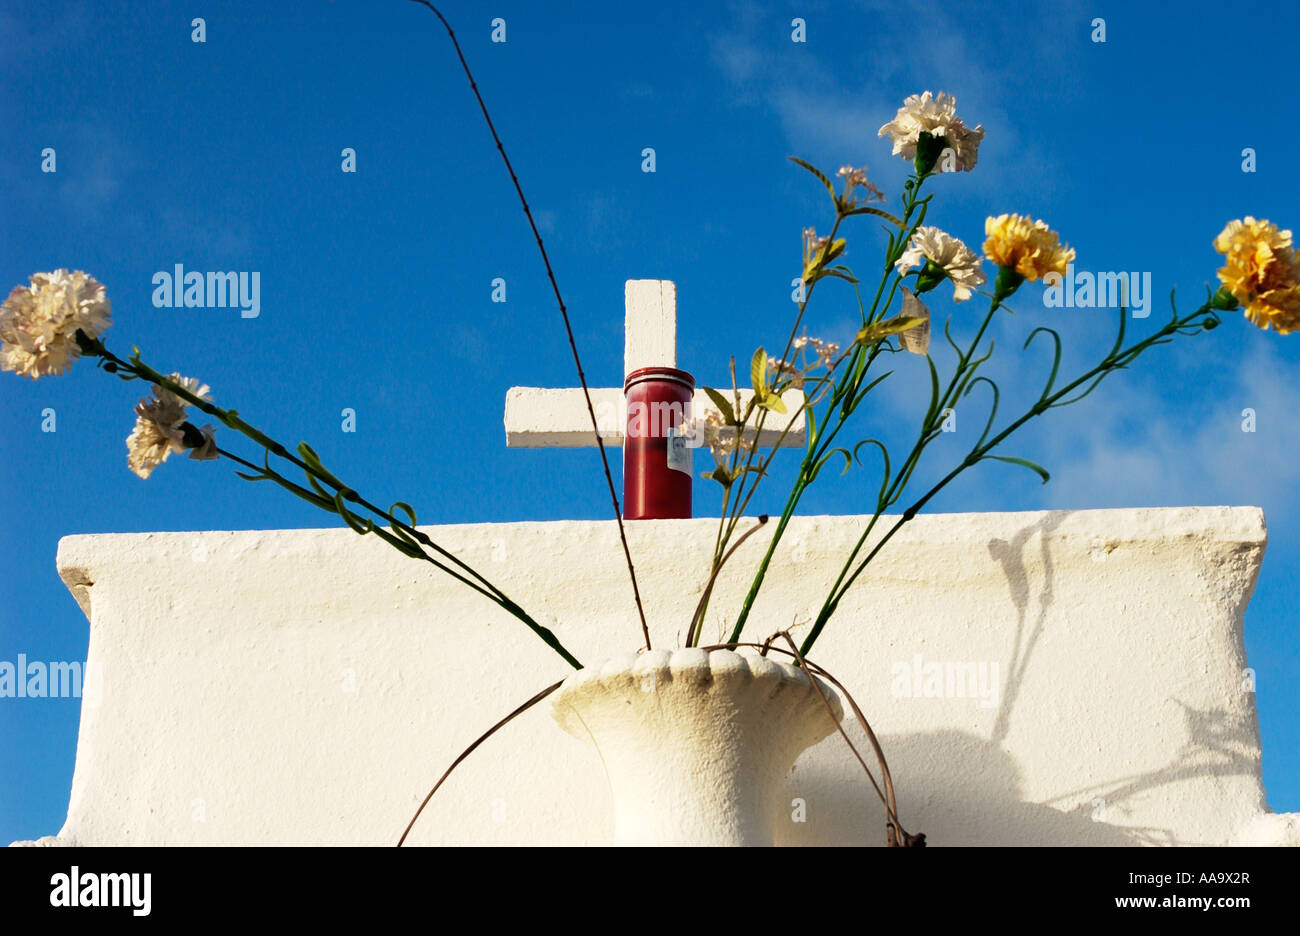 The Cemetery of Morne-a-L'Eau, Guadeloupe FR Stock Photo